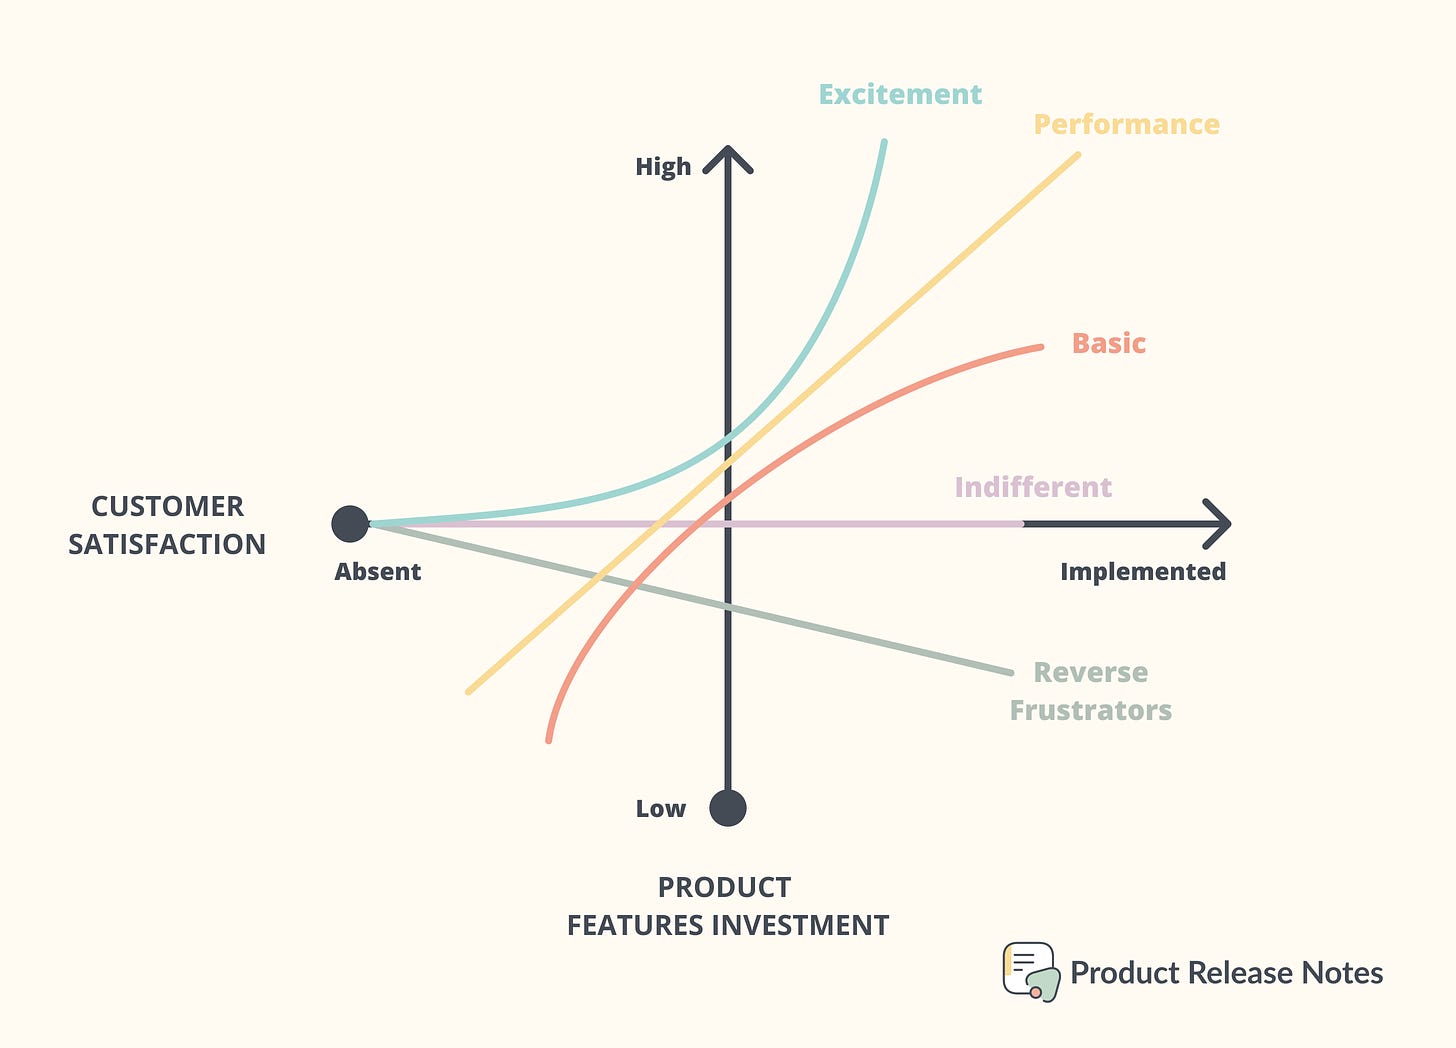 Kano Model or Customer Delight vs. Features Investment